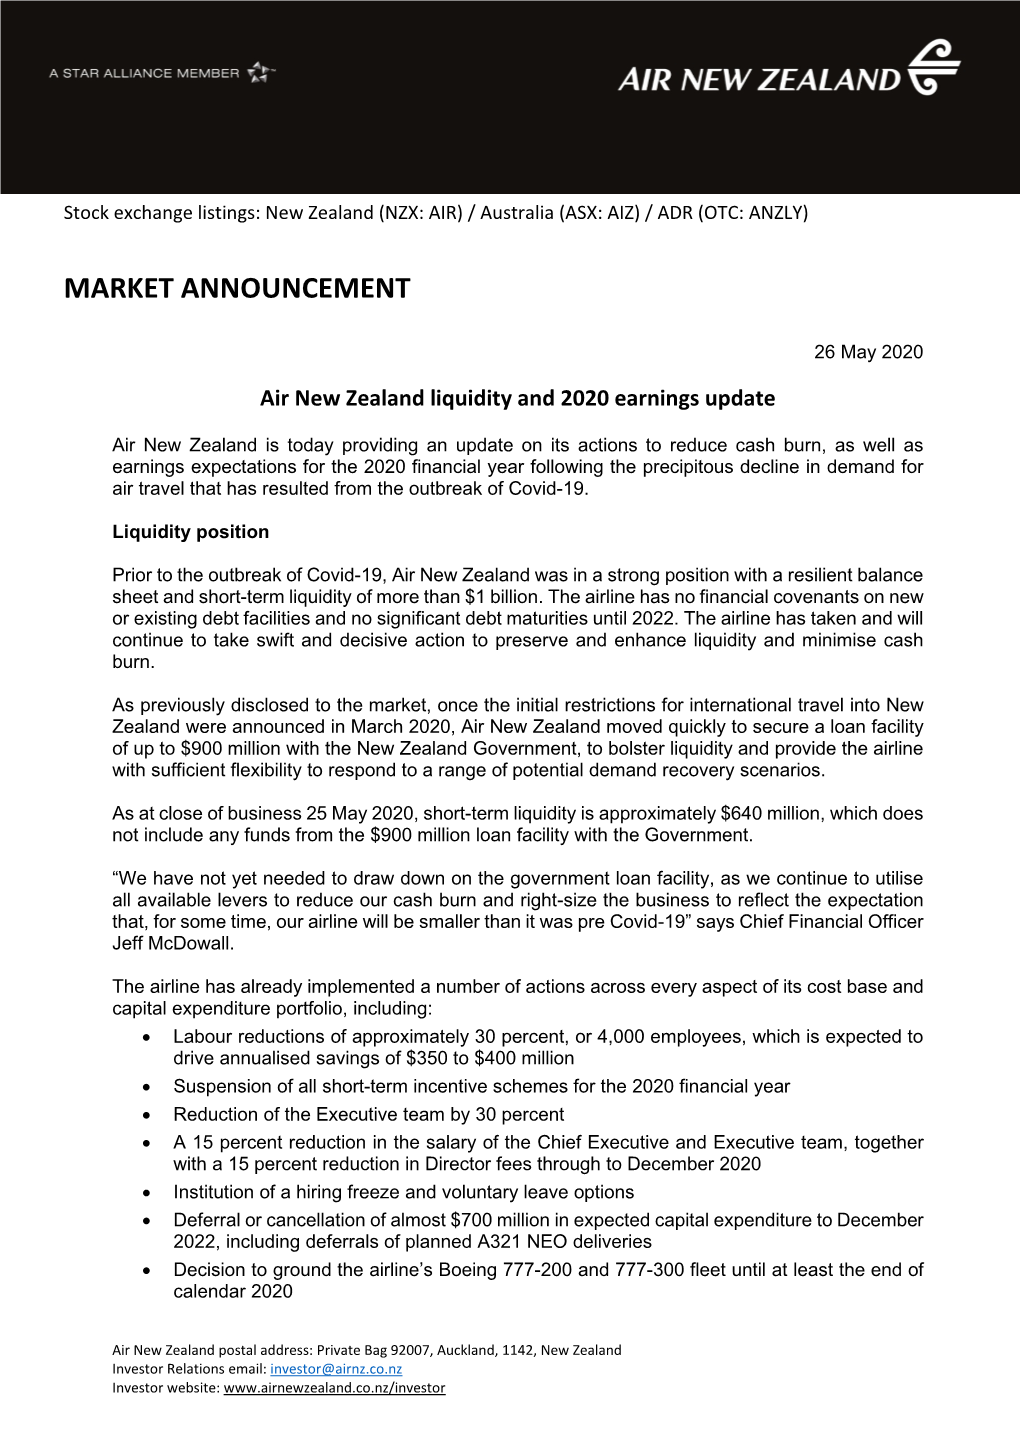 Air New Zealand Liquidity and 2020 Earnings Update